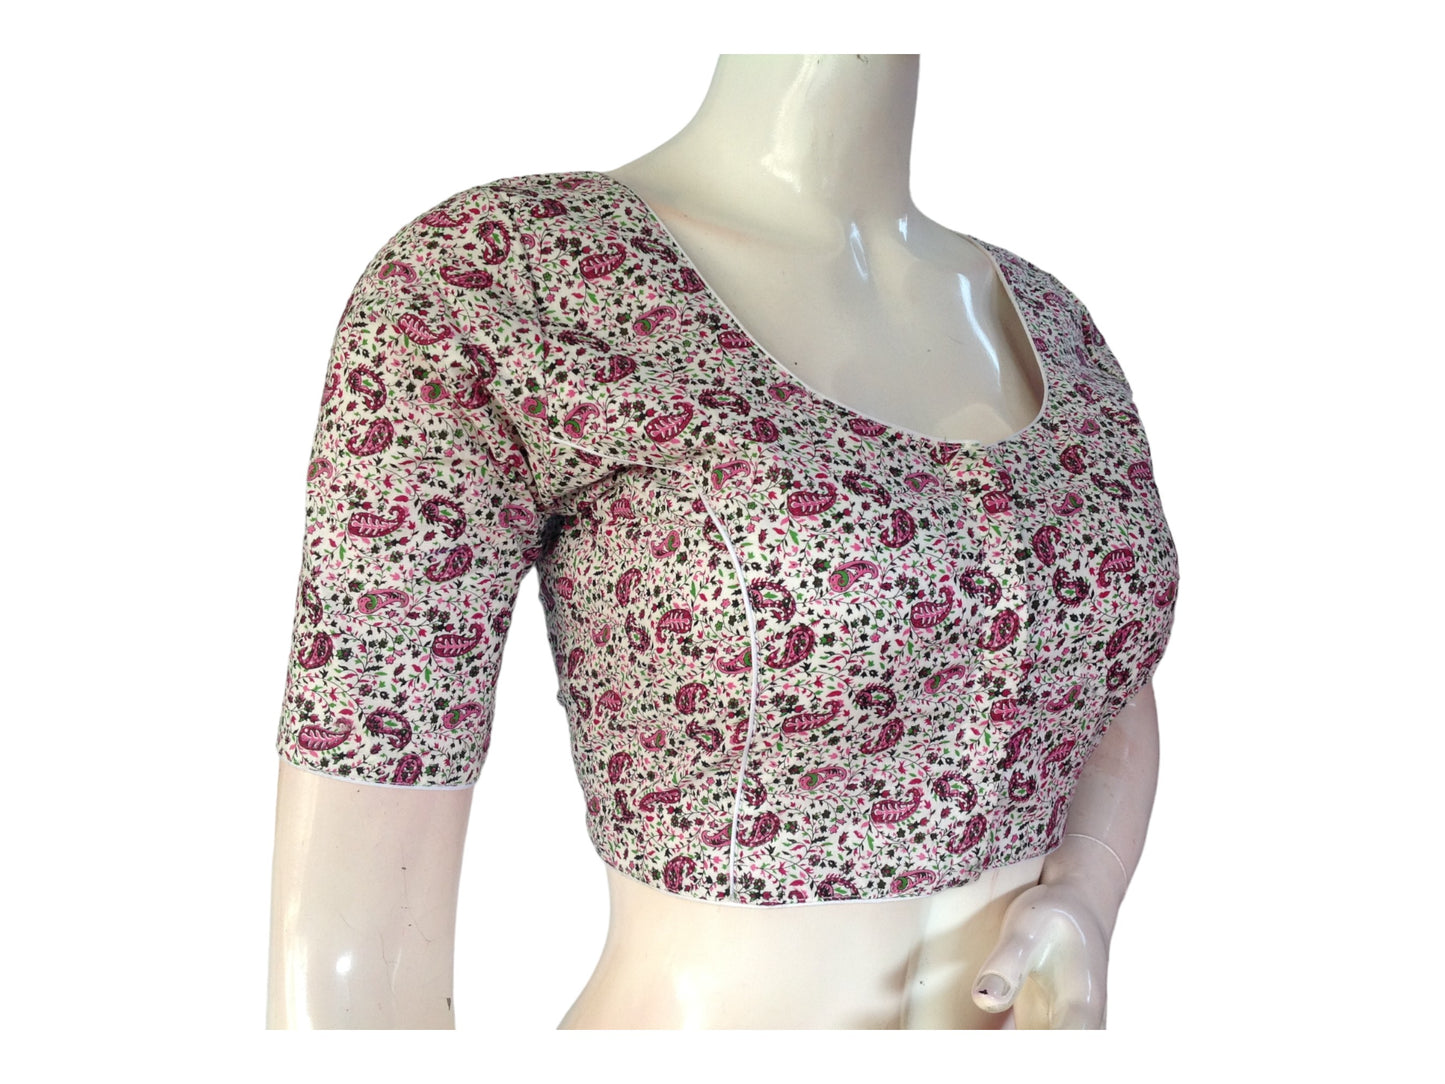 White Color Cotton Floral Printed Saree Blouse, Indian Readymade Choli top from D3 Blouses